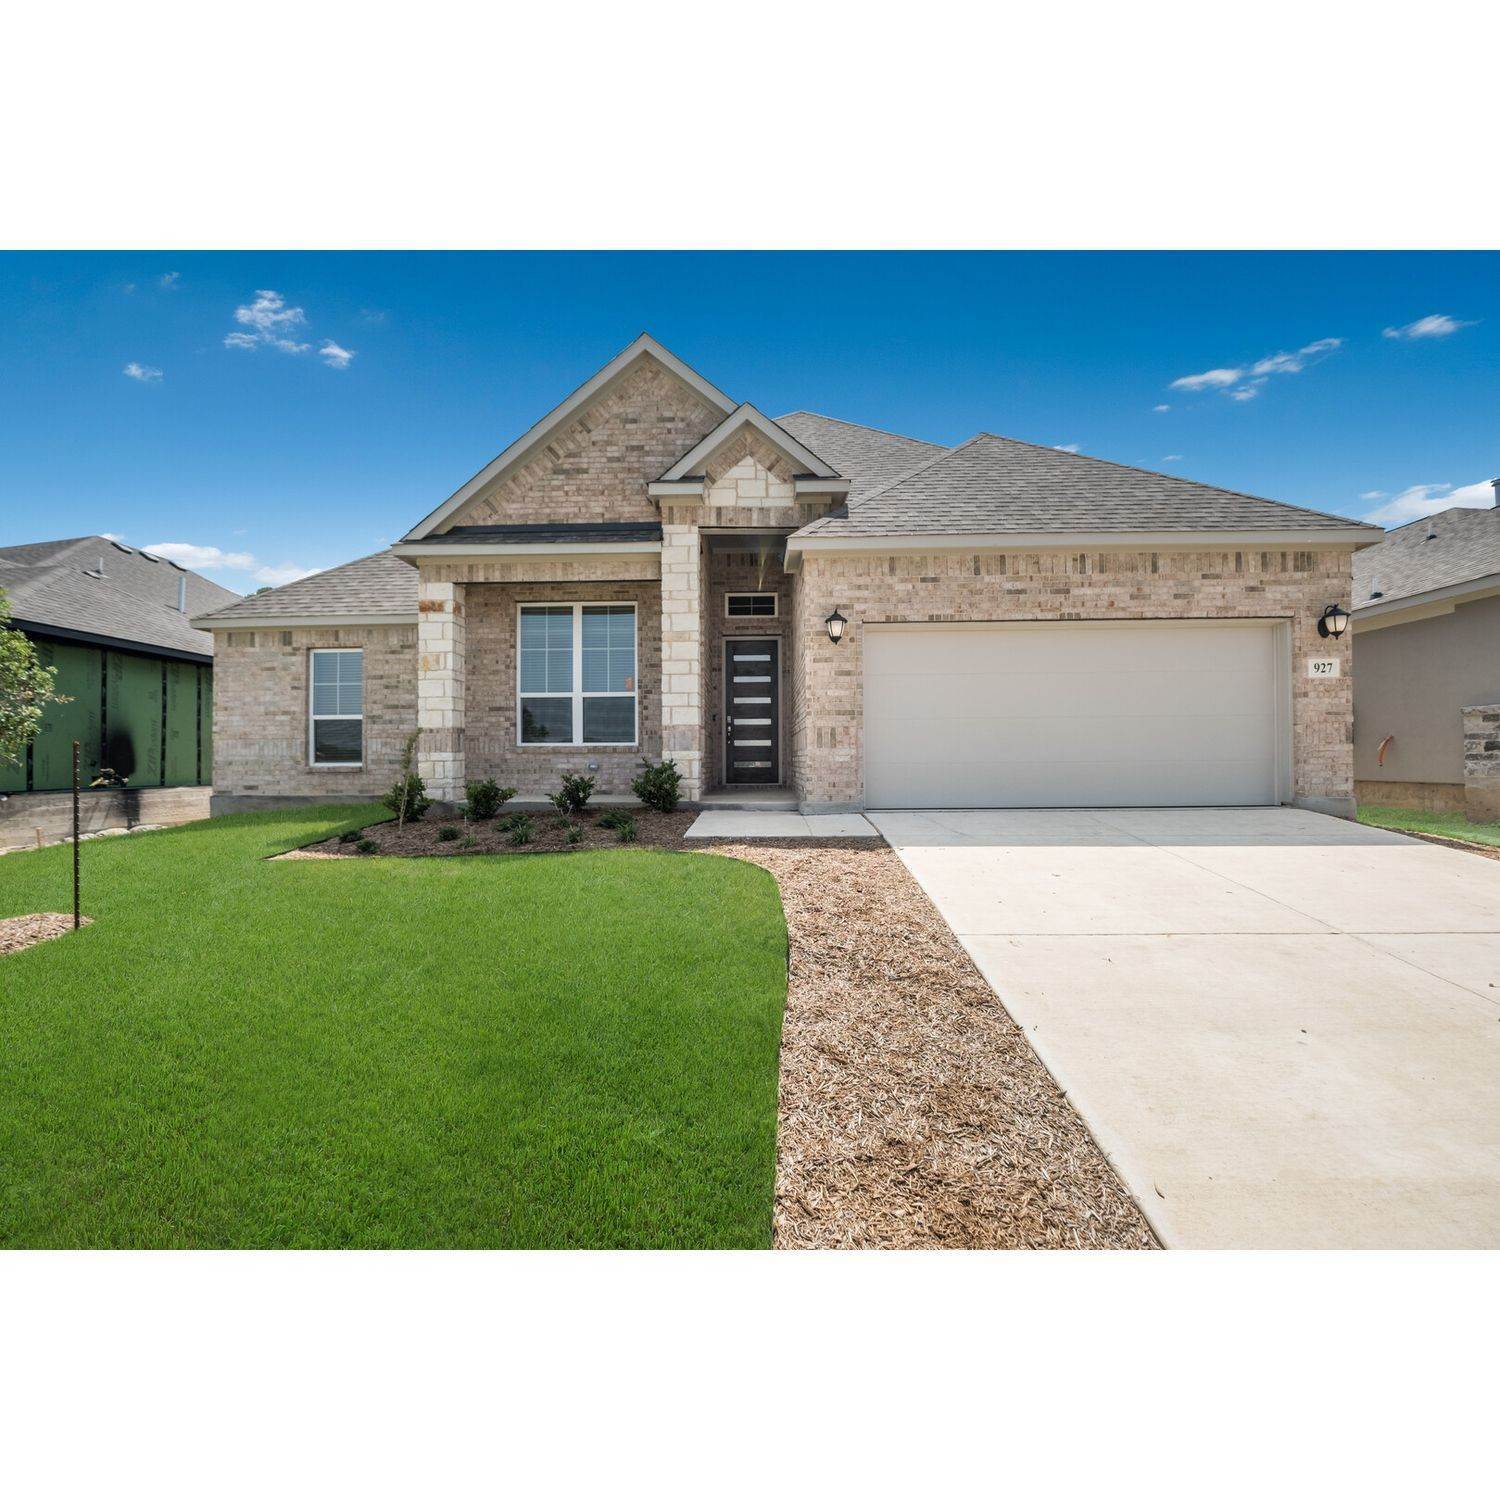 Single Family for Sale at New Braunfels, TX 78130